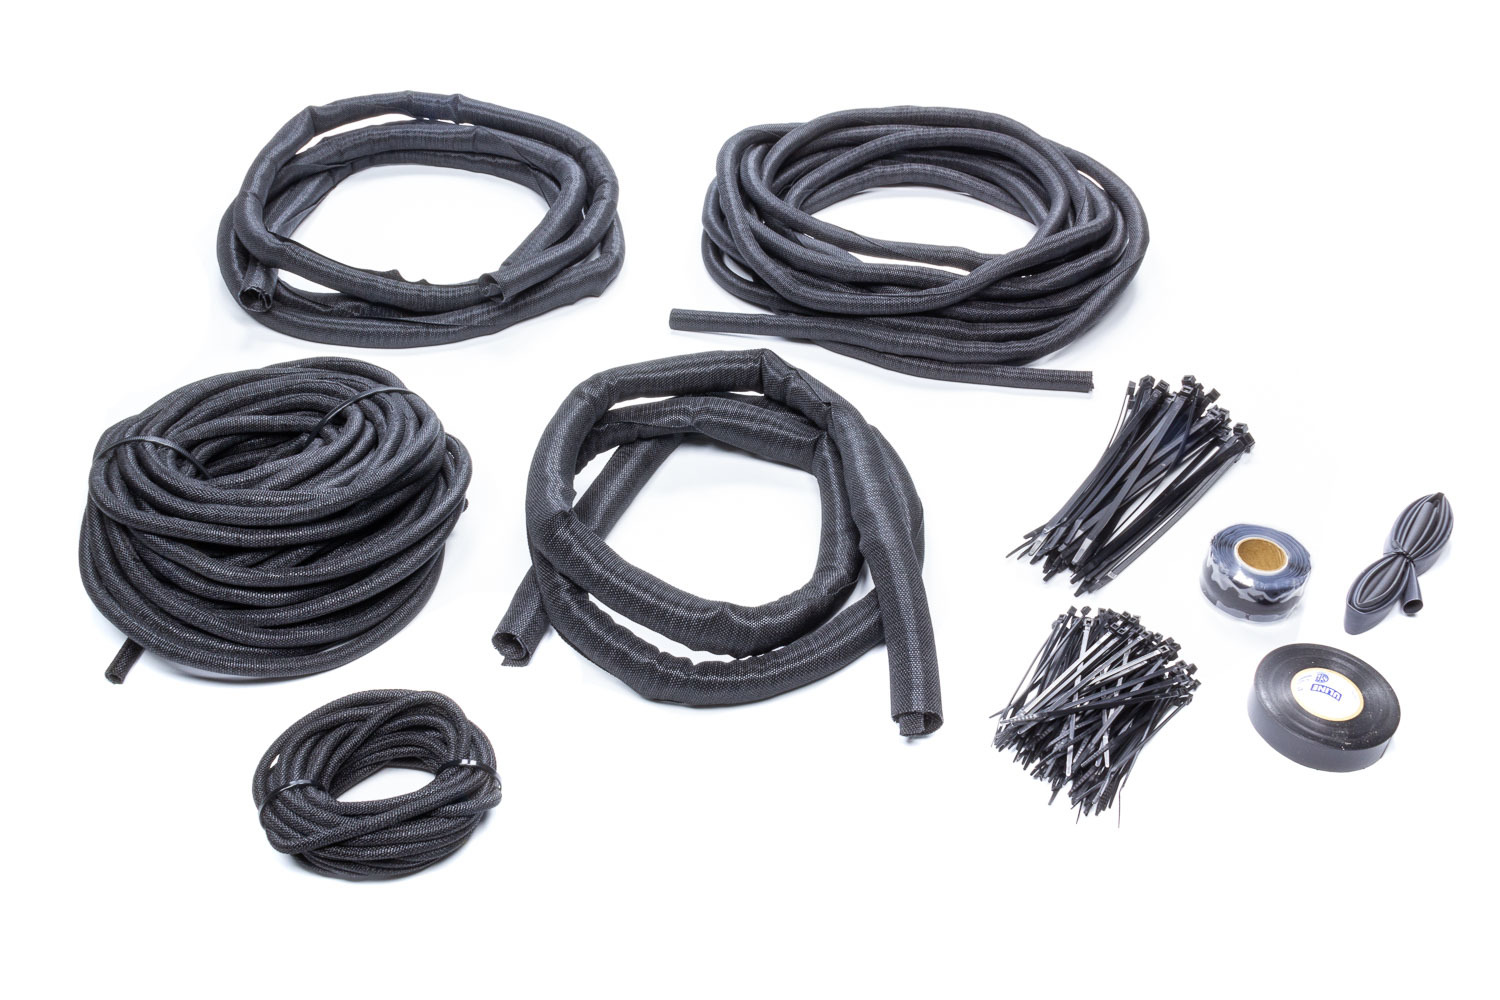 Painless Wiring 70970 Hose and Wire Sleeve, ClassicBraid Chassis Kit, 1/8 to 1 in Diameter / Heat Shrink / Ties / Tape, Split, Knitted Cloth, Black, Kit